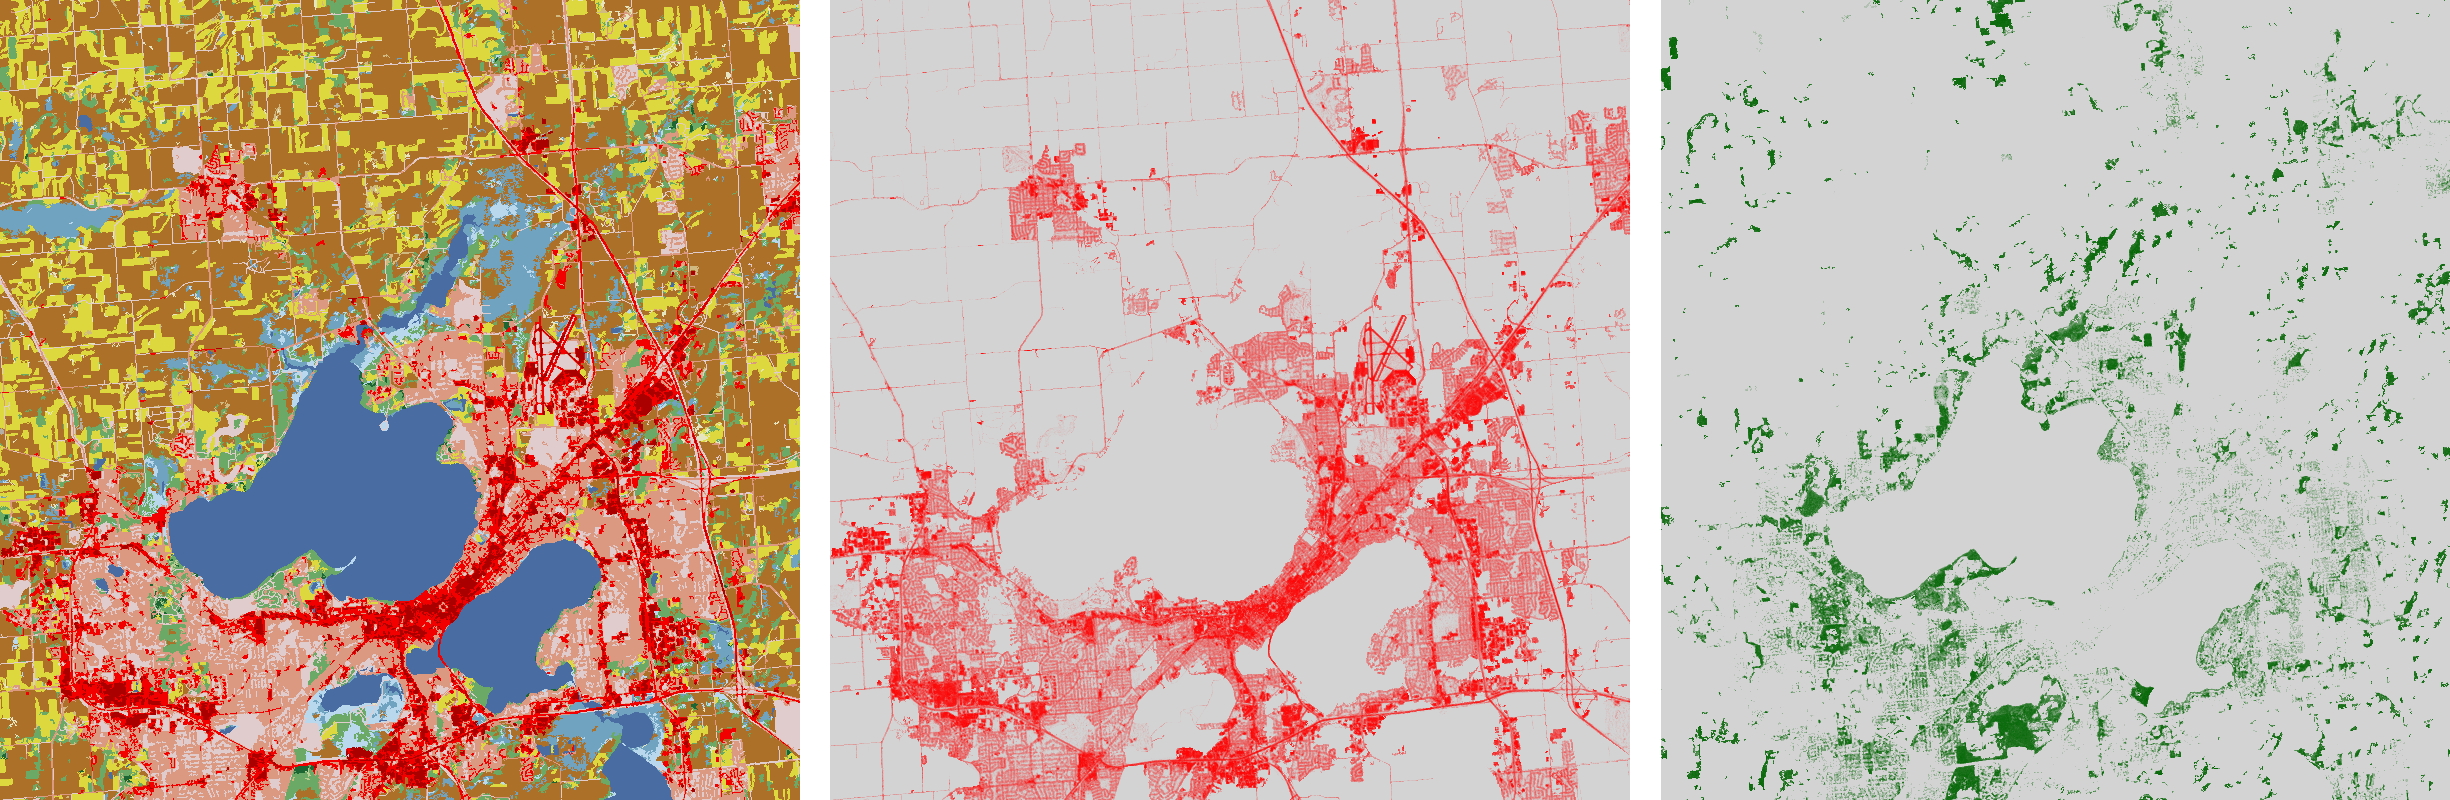 Color-coded maps of Madison, WI show that most of the area is made up of fields, with a large lake in the center. The urban spaces, in red, are largely focused around the water. There is very little canopy cover.